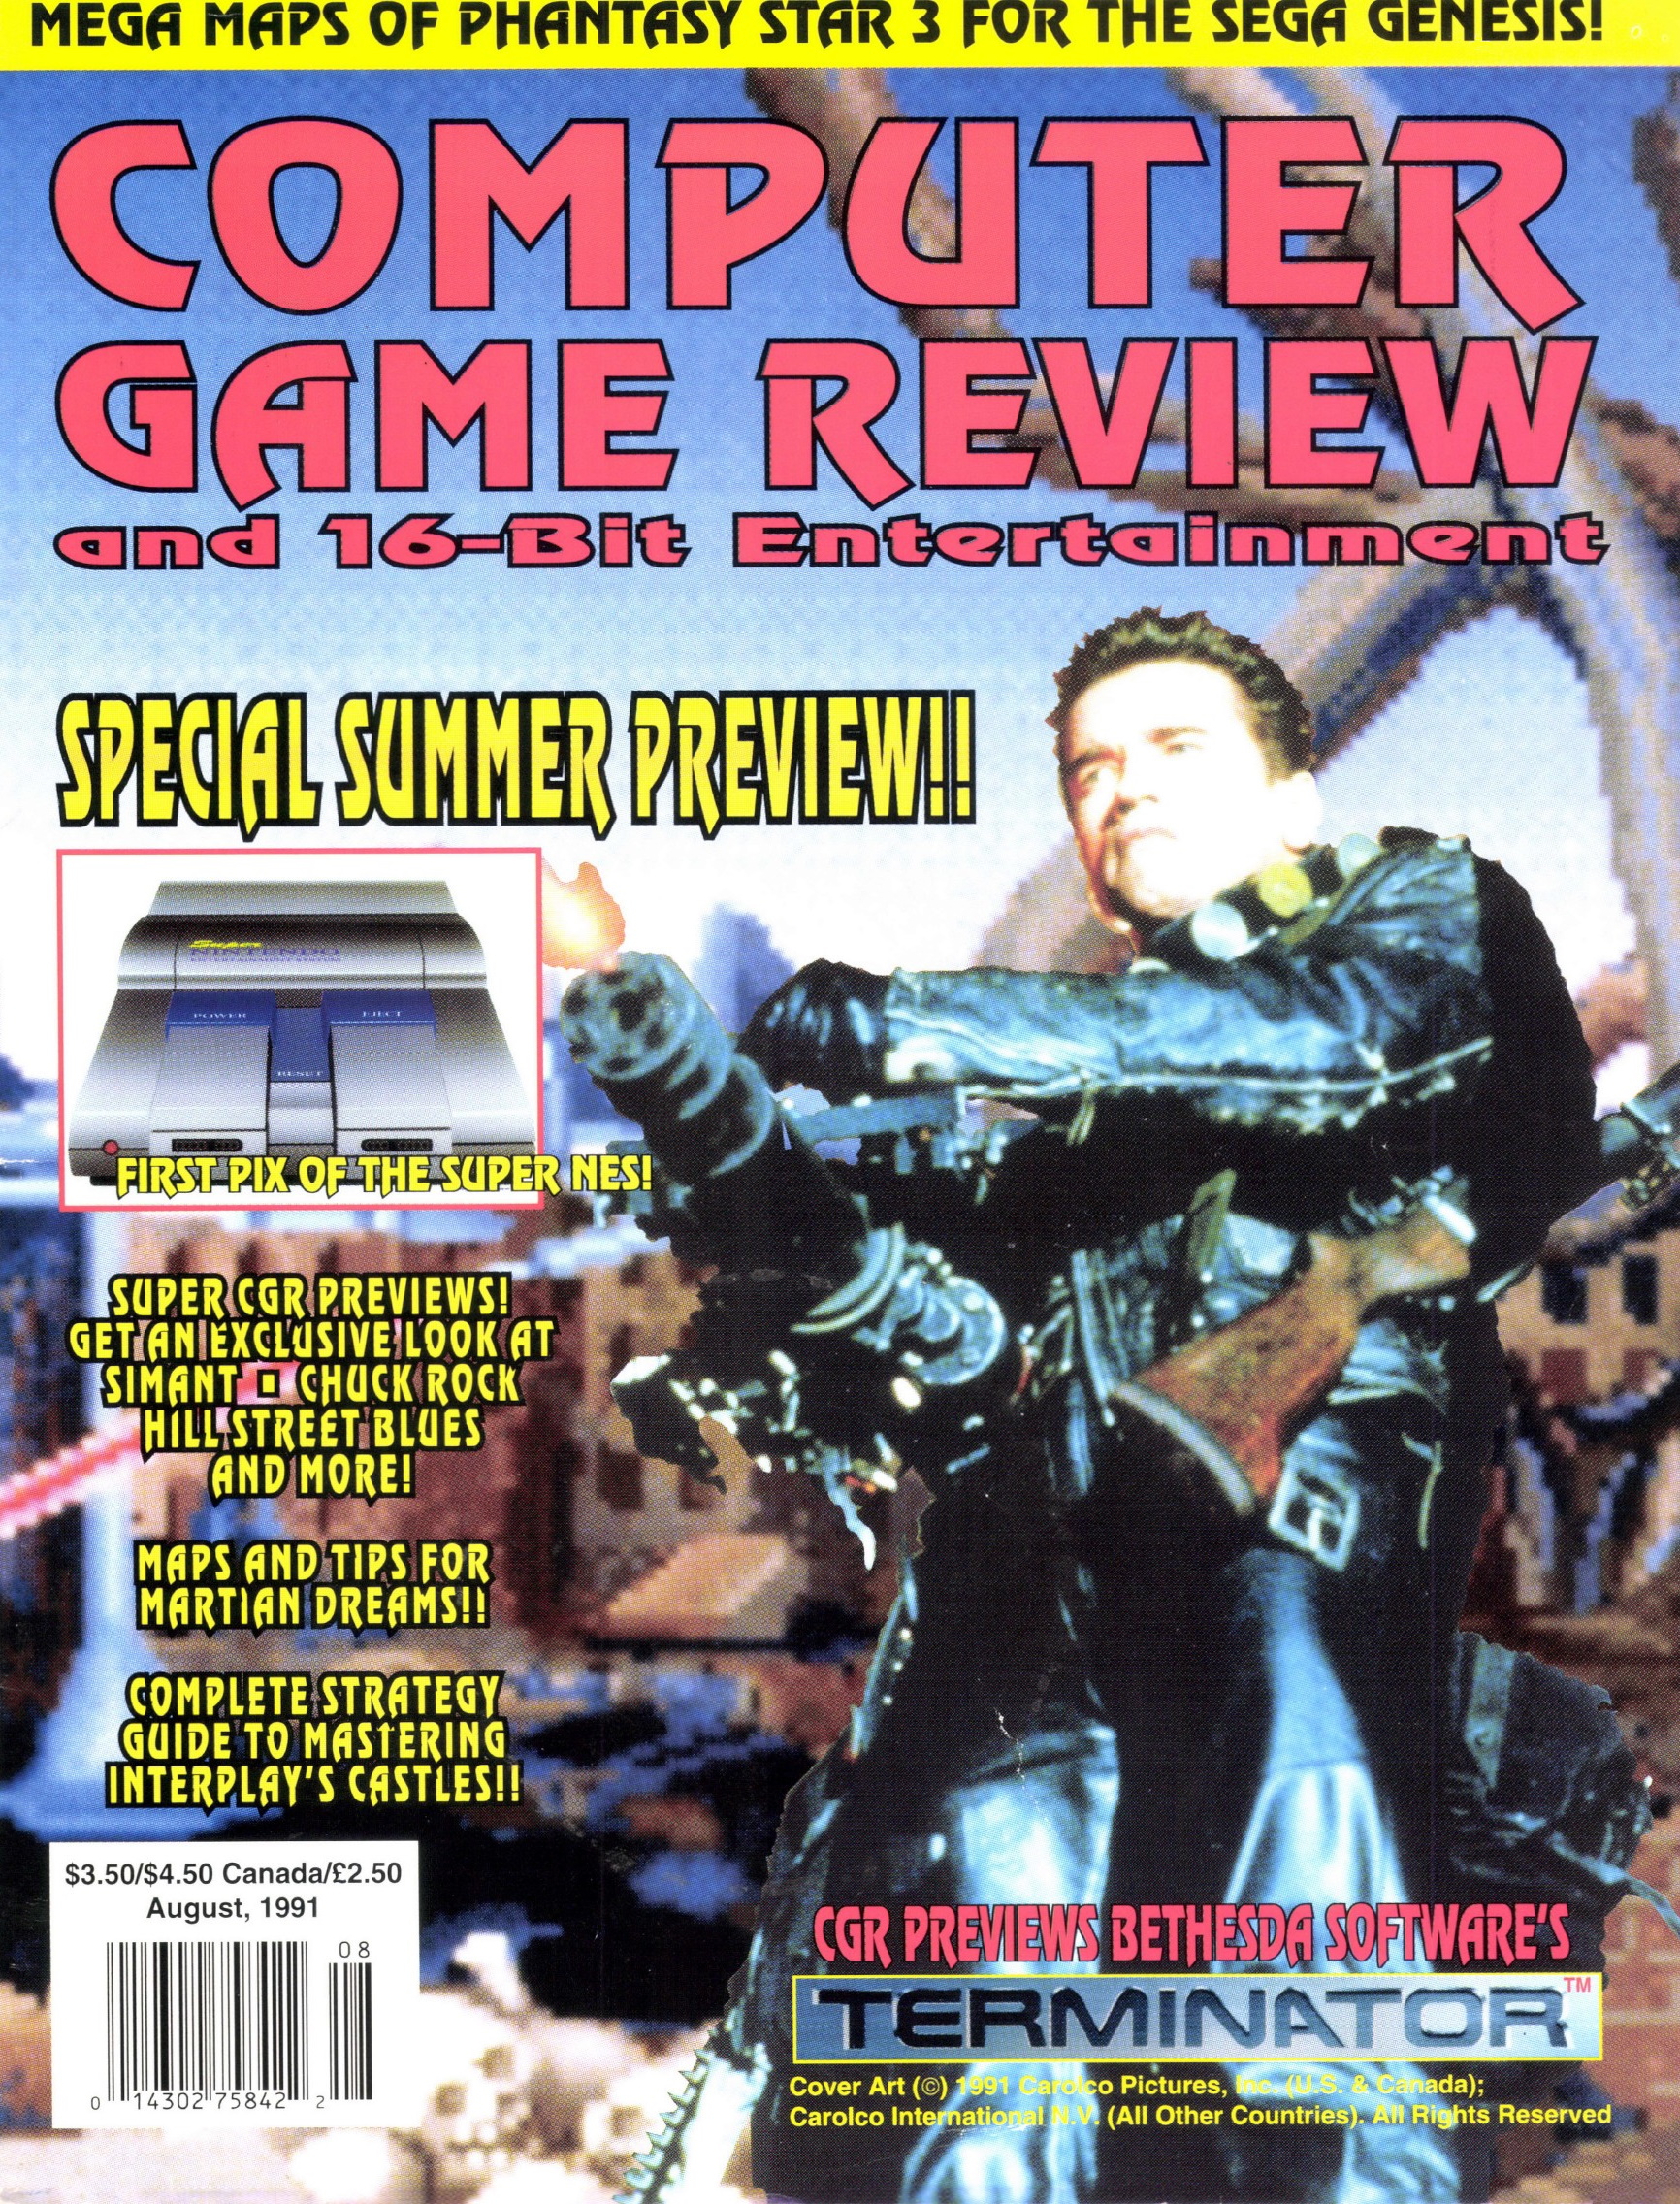 Computer Game Review and 16-Bit Entertainment Issue 1 Volume 1 (August 1991)